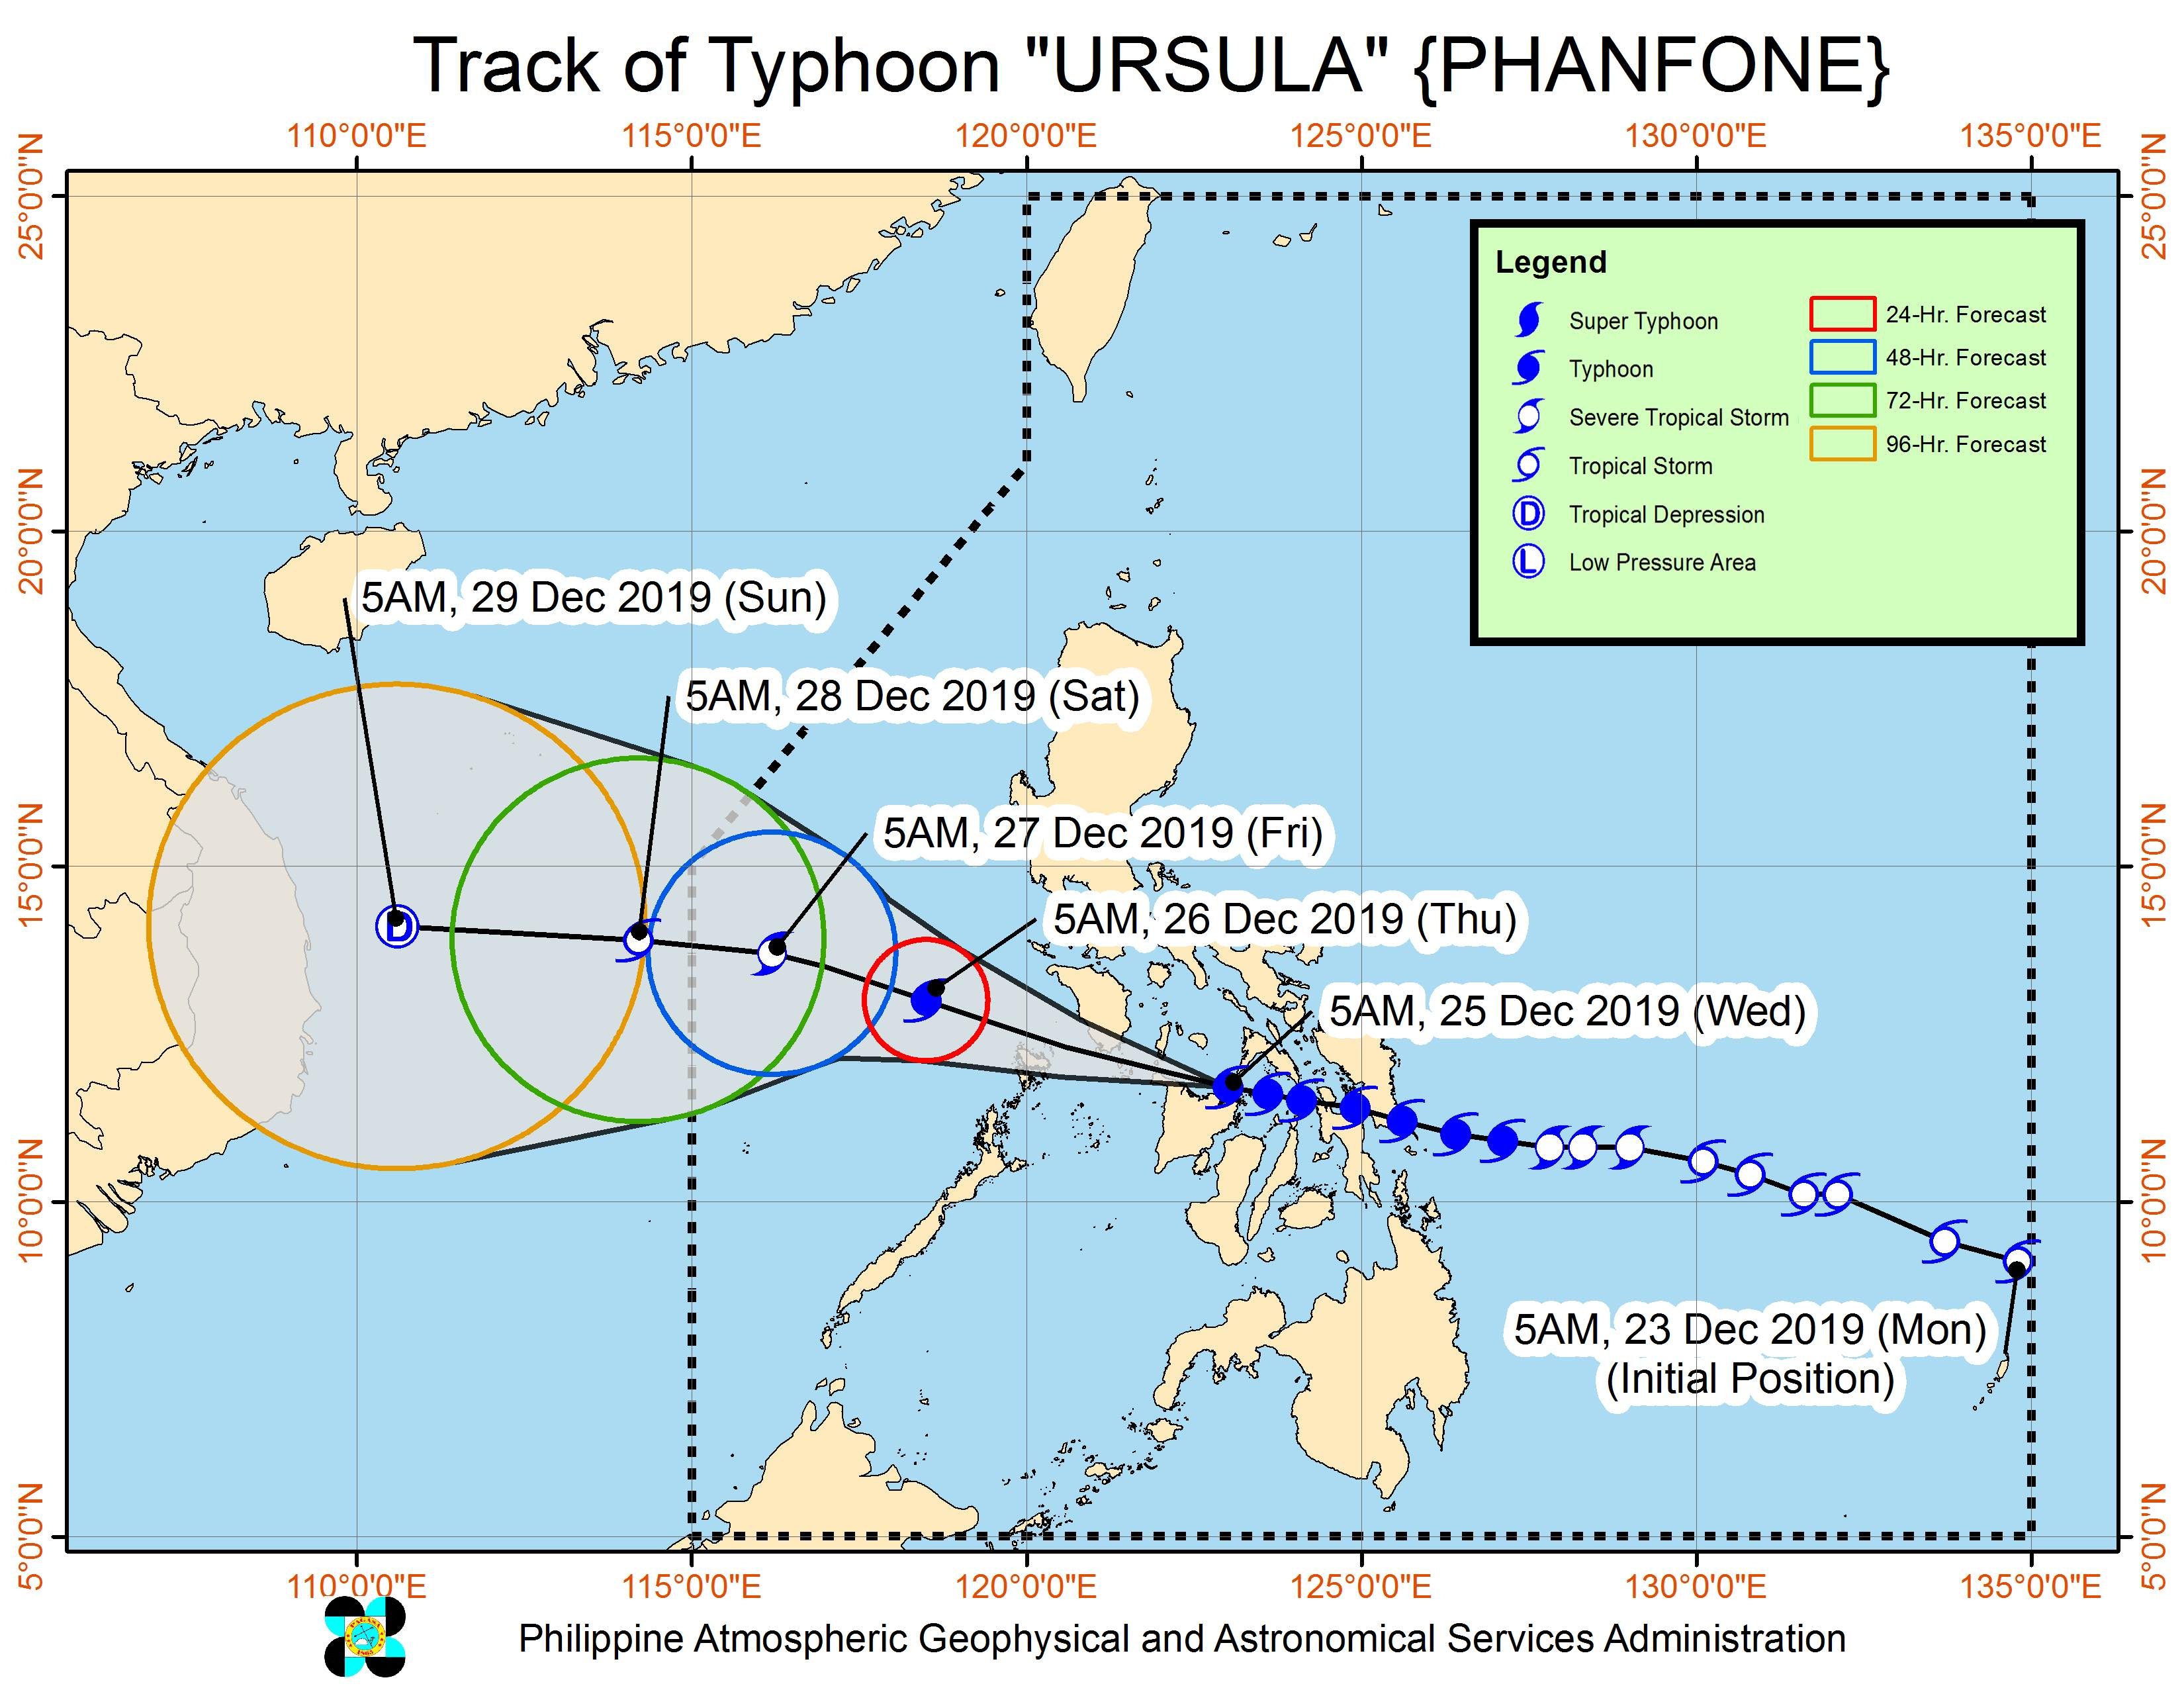 Forecast track of Typhoon Ursula (Phanfone) as of December 25, 2019, 8 am. Image from PAGASA 